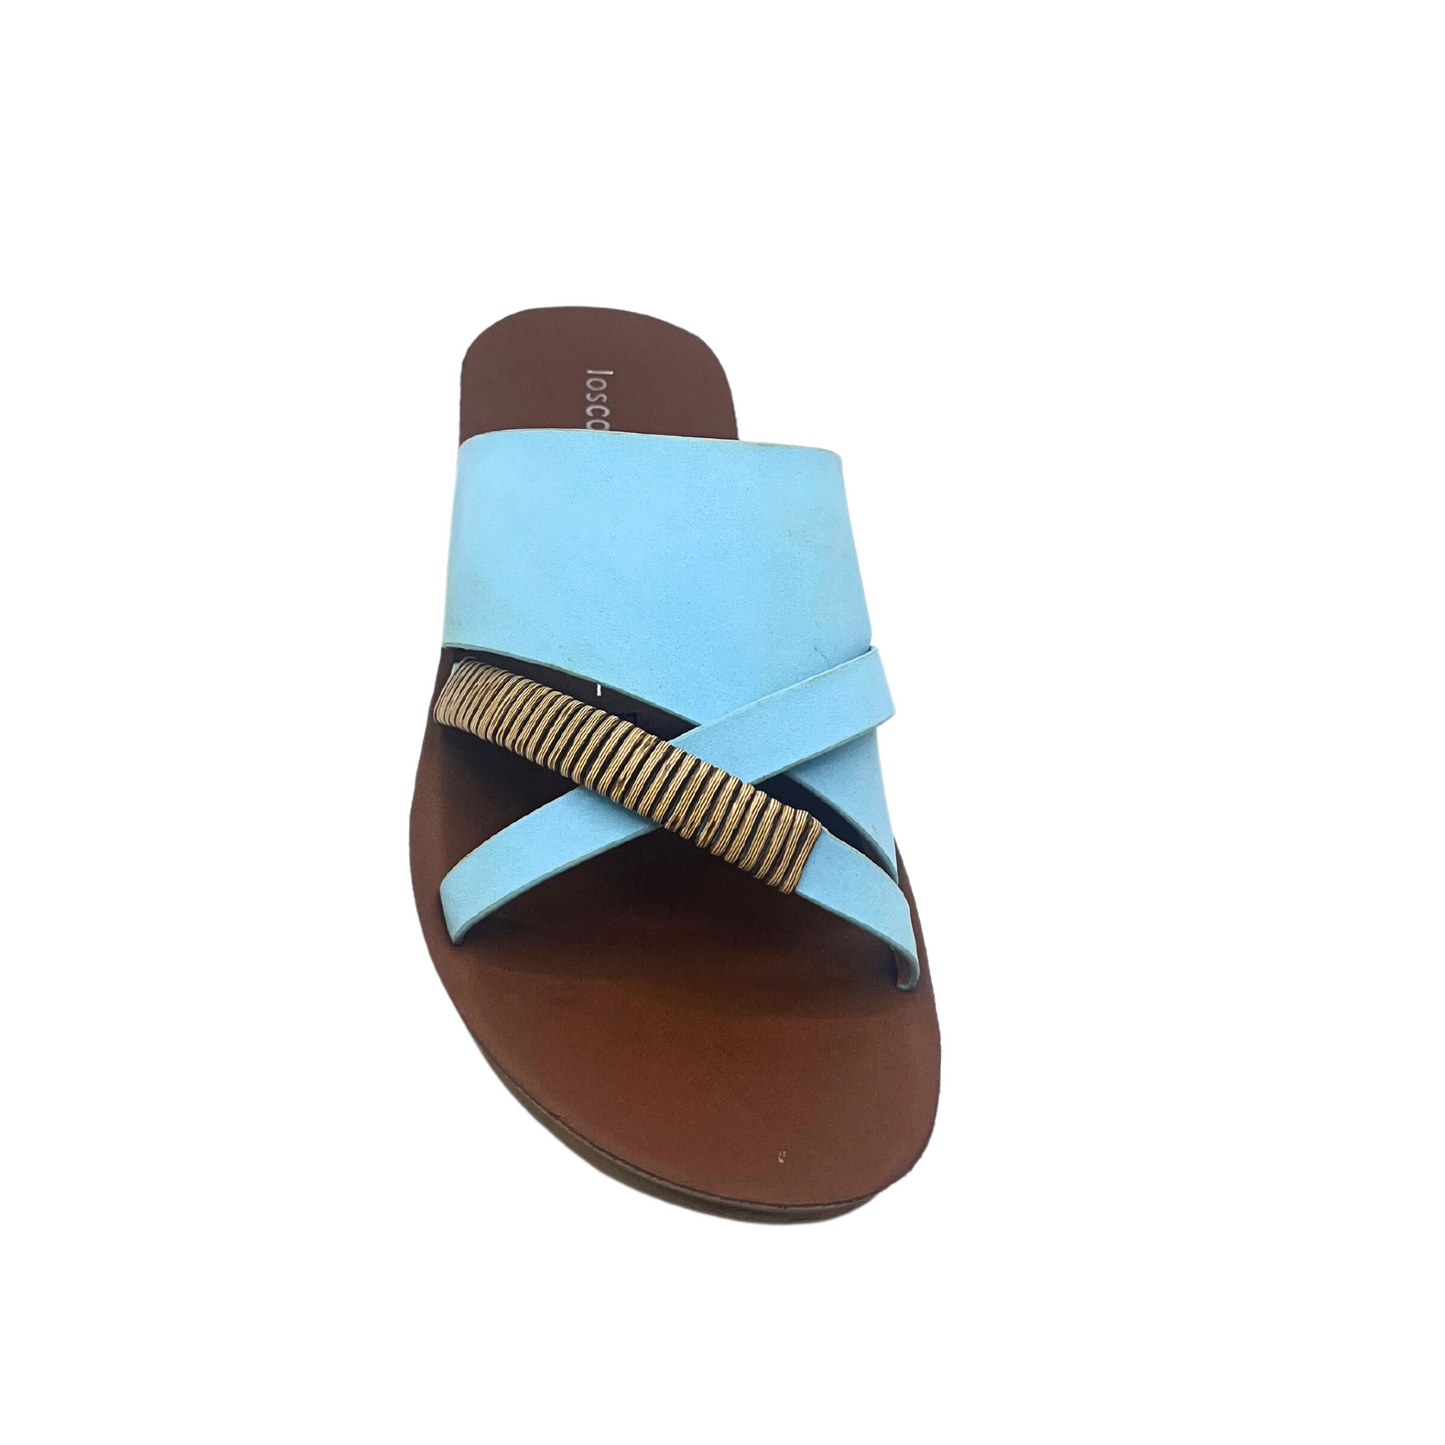 Top down view of a slip on sandal in a chalk blue leather with a metallic detail on one of the straps.